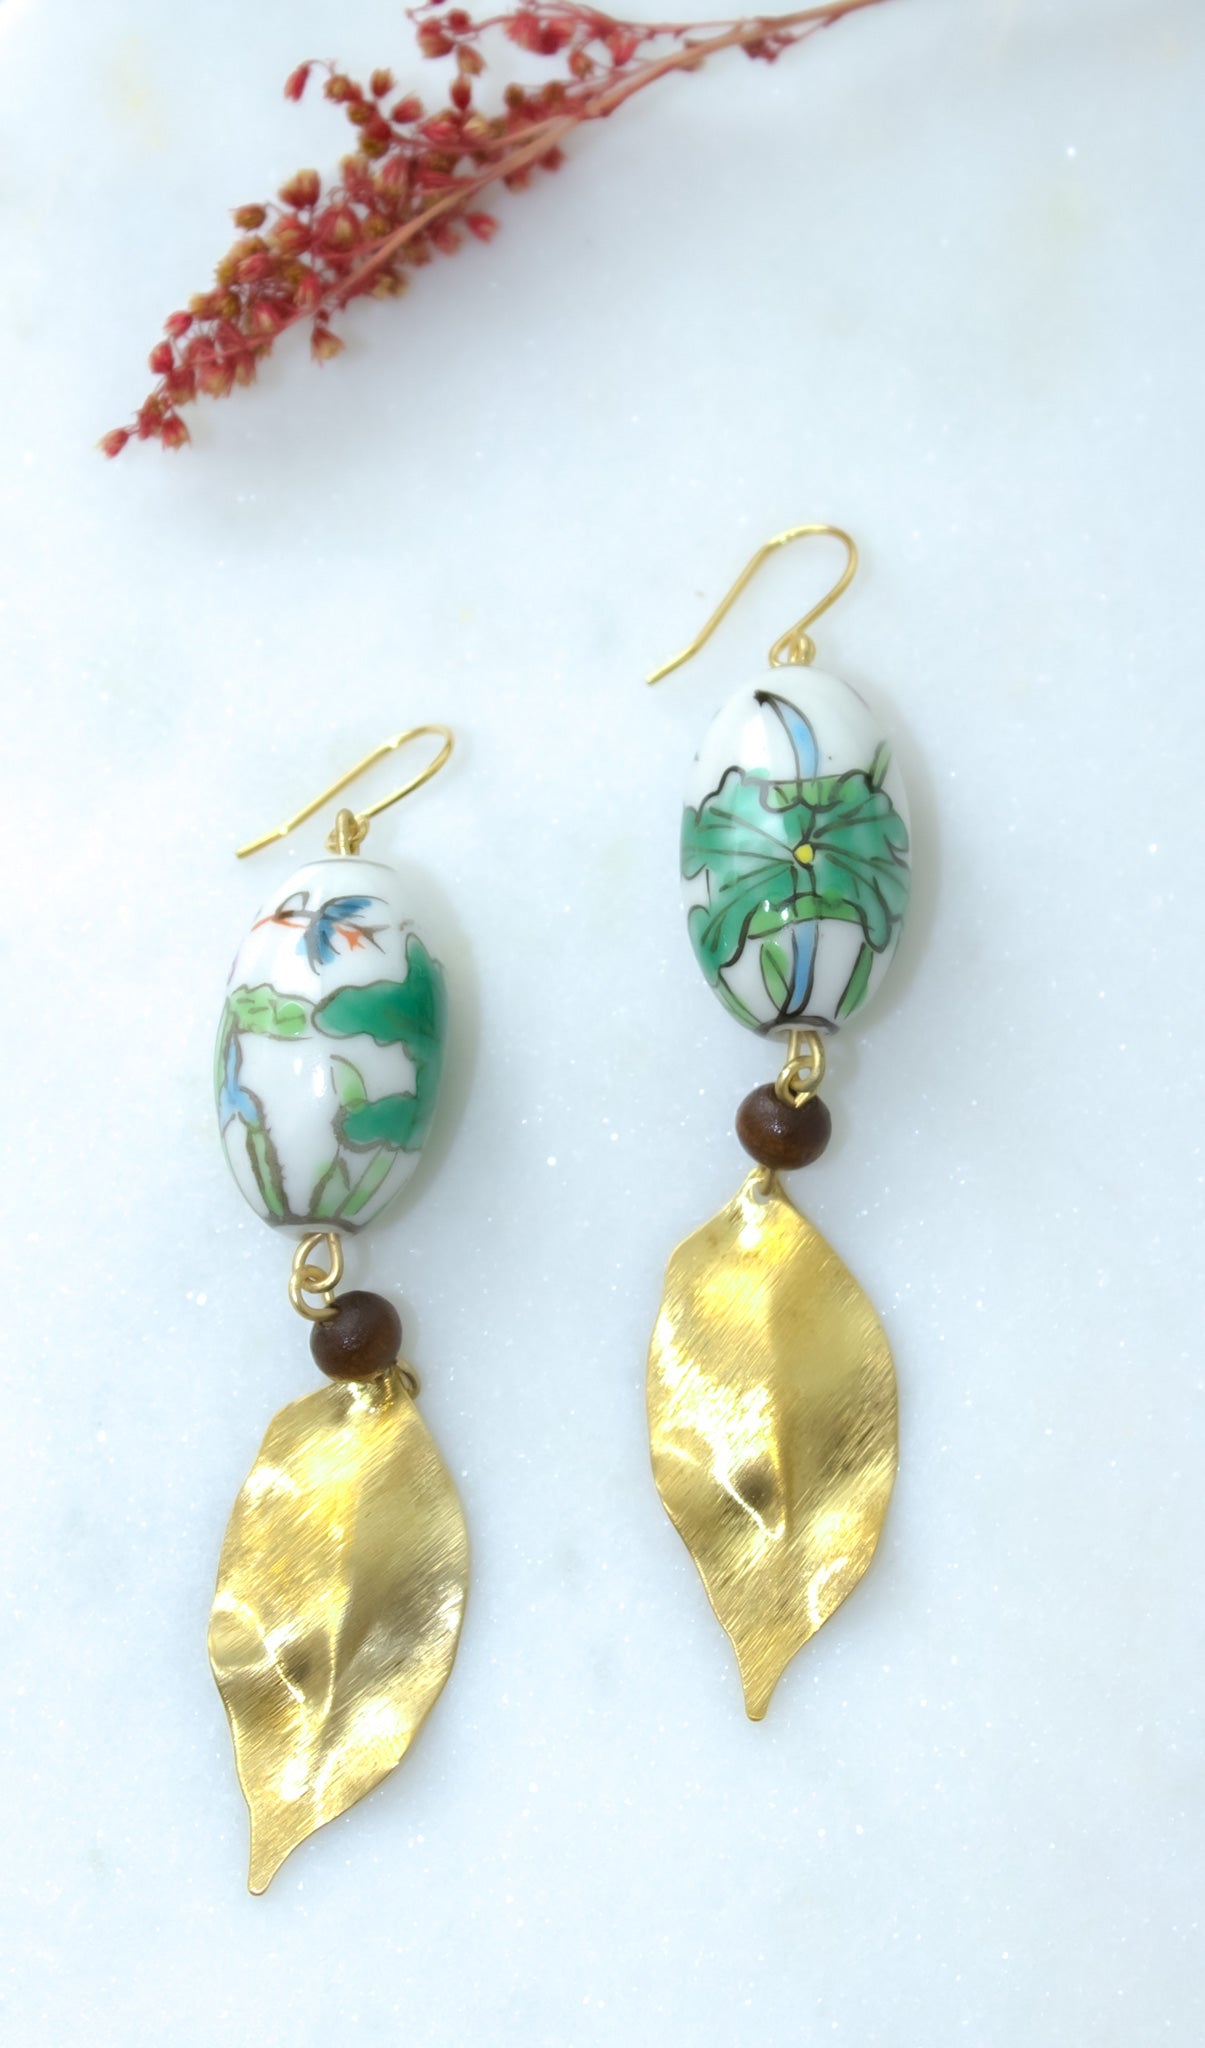 Vintage Porcelain Hand Painted Floral Bead Earrings with Brushed Brass Leaves